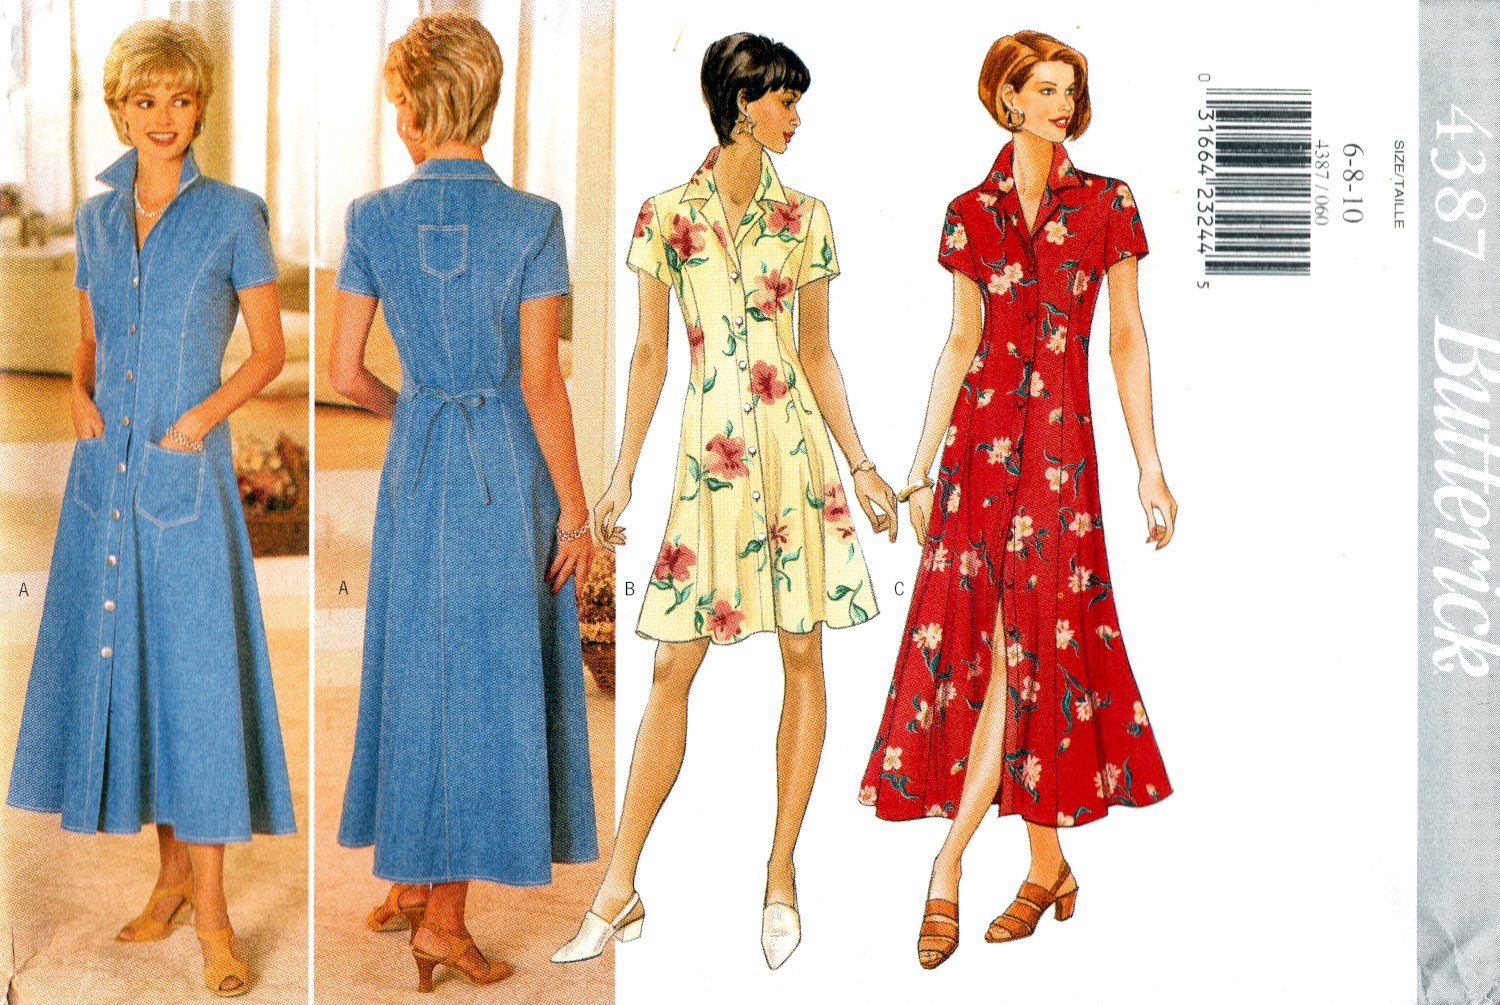 Butterick 4387 Misses Petite Dress Long or Short Button Front Sewing Pattern sizes 6-8-10